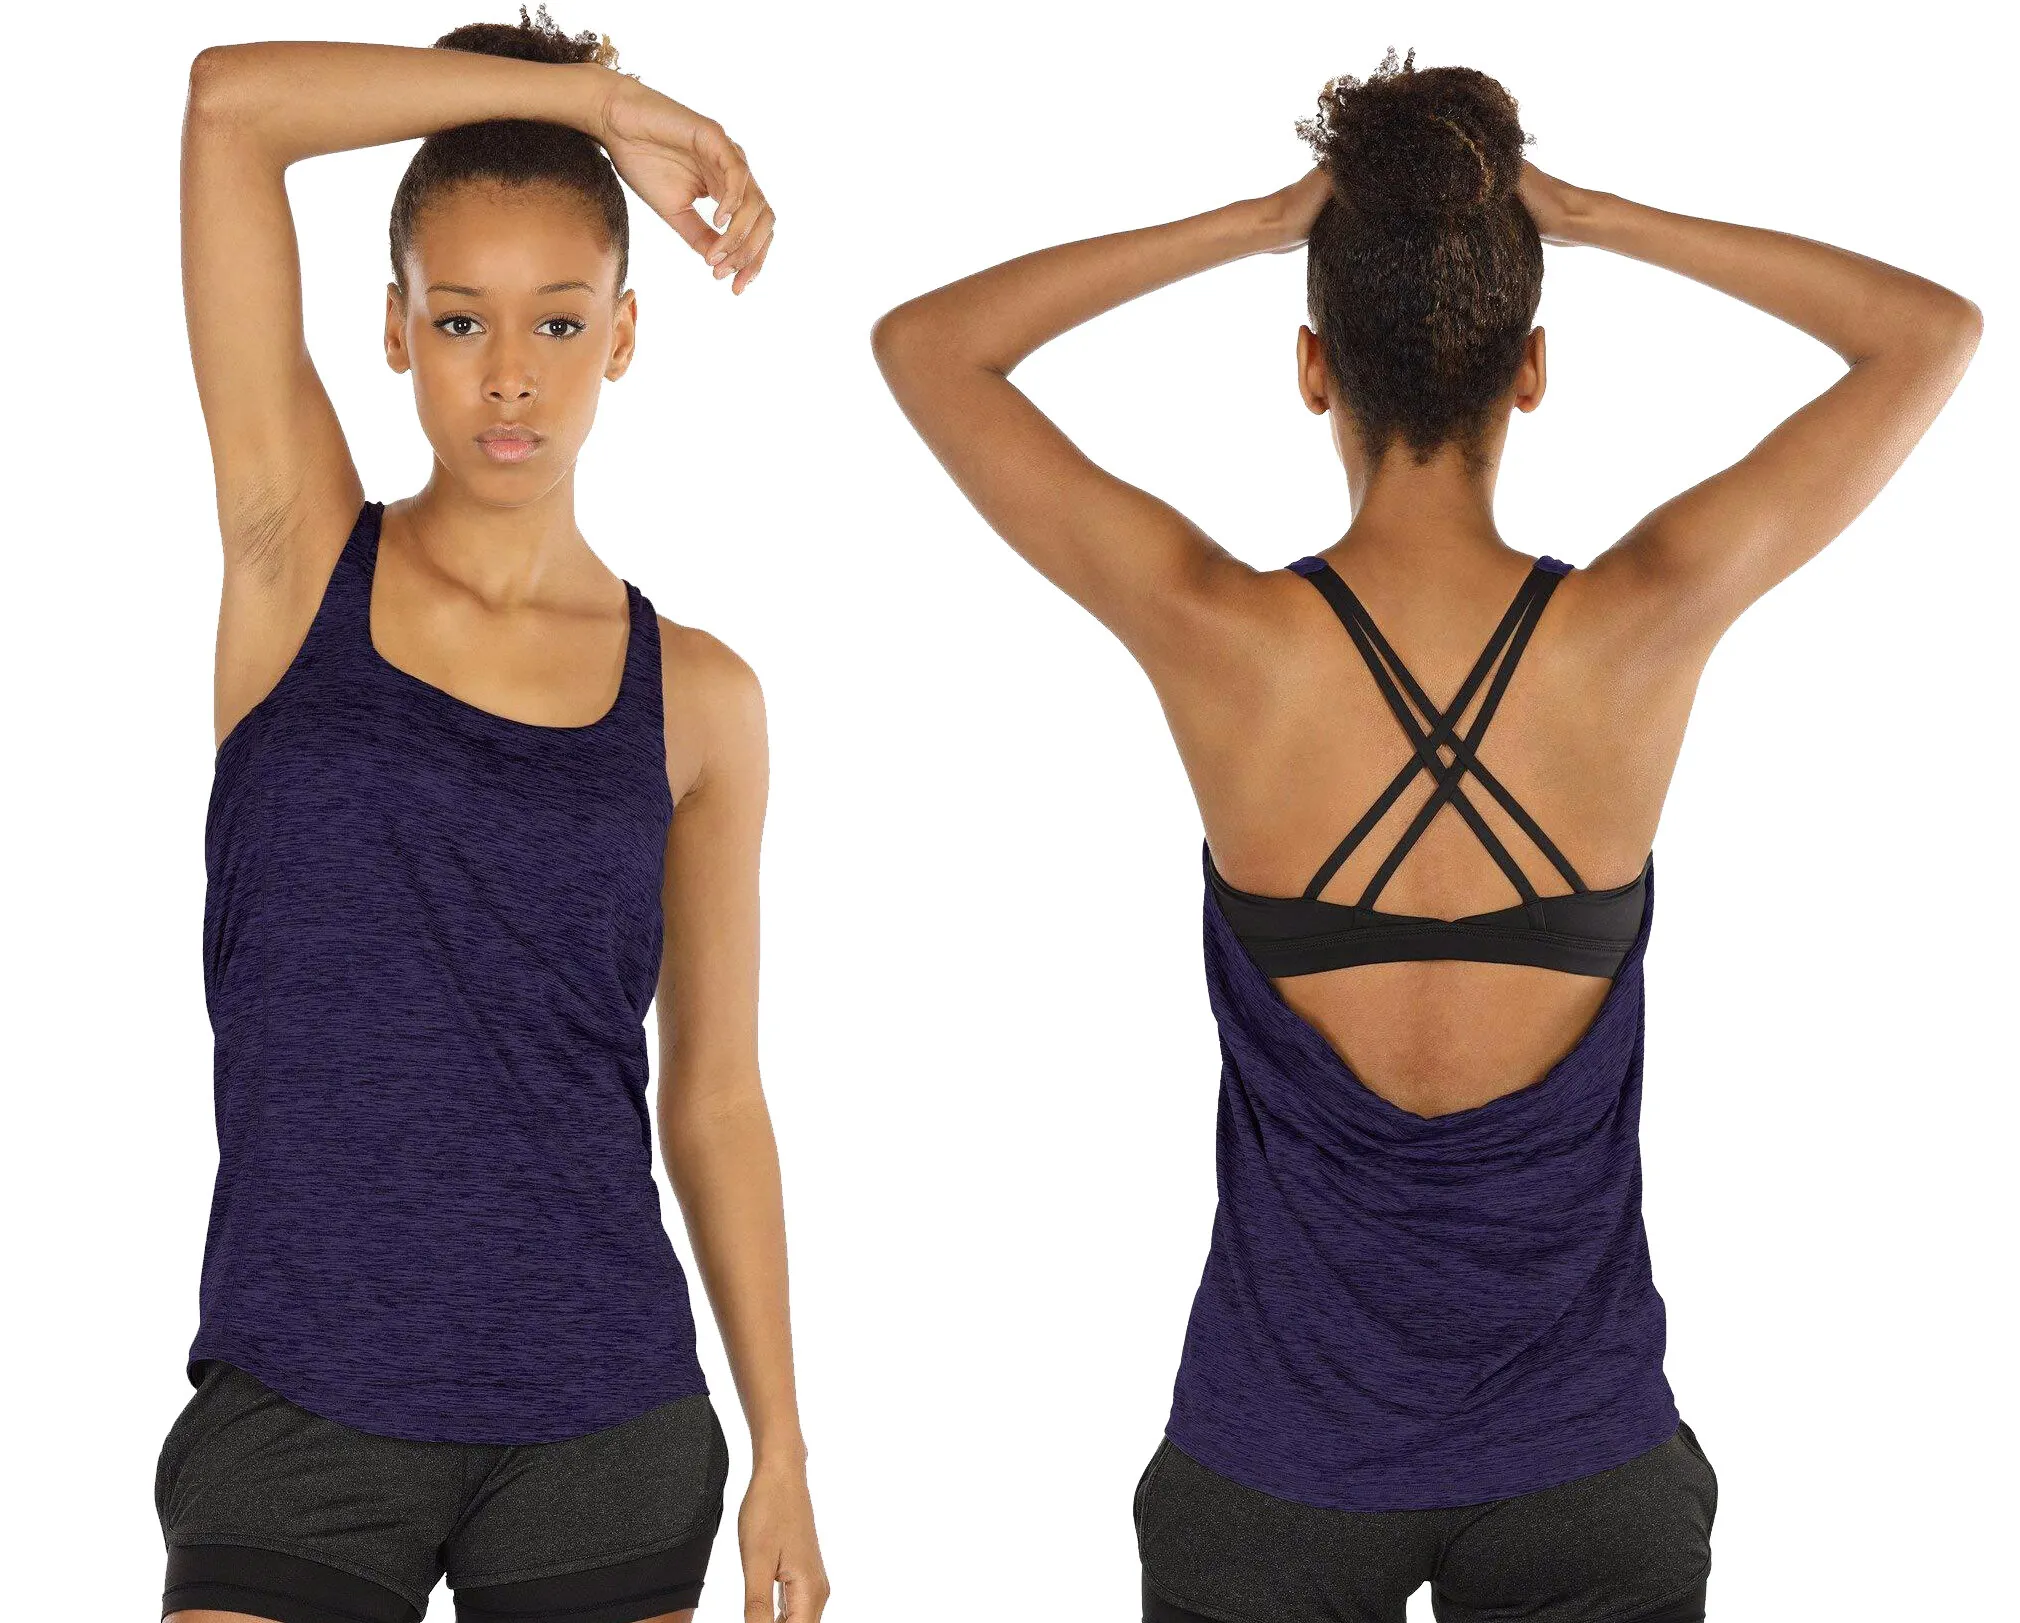 

Women Yoga Tops Vest Fitness Lounging Jogging Hiking s Gym Tank Strappy Athletic , Exercise Running Gym sports workout